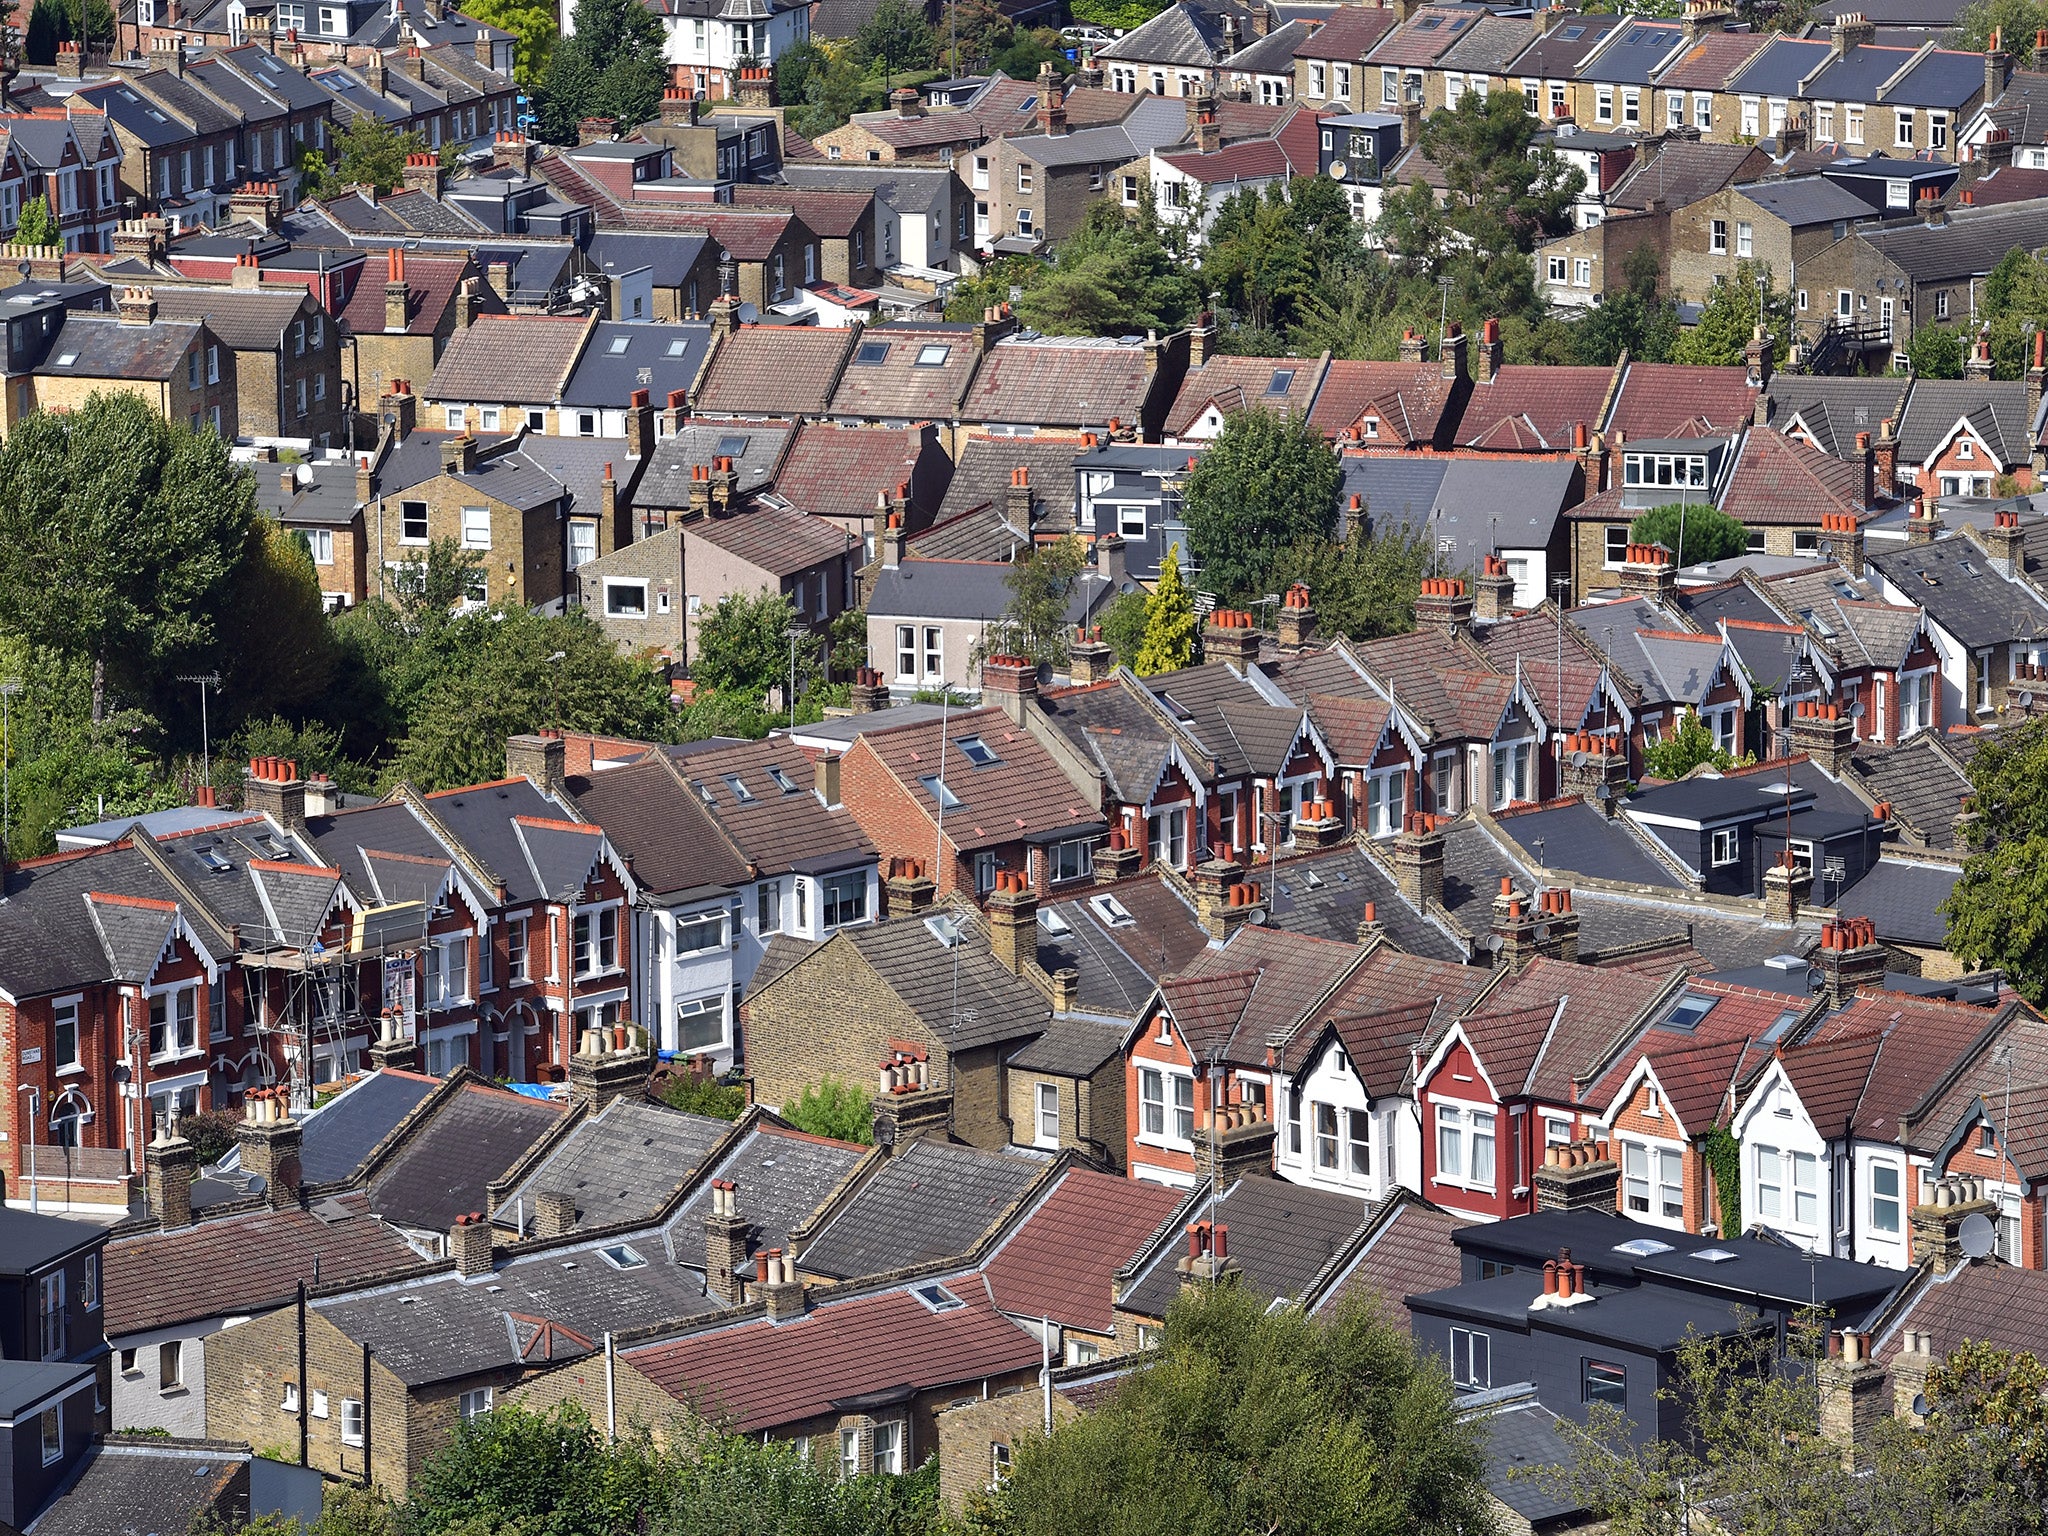 Millions of people have been priced out of the market, or have been exploited by rogue landlords